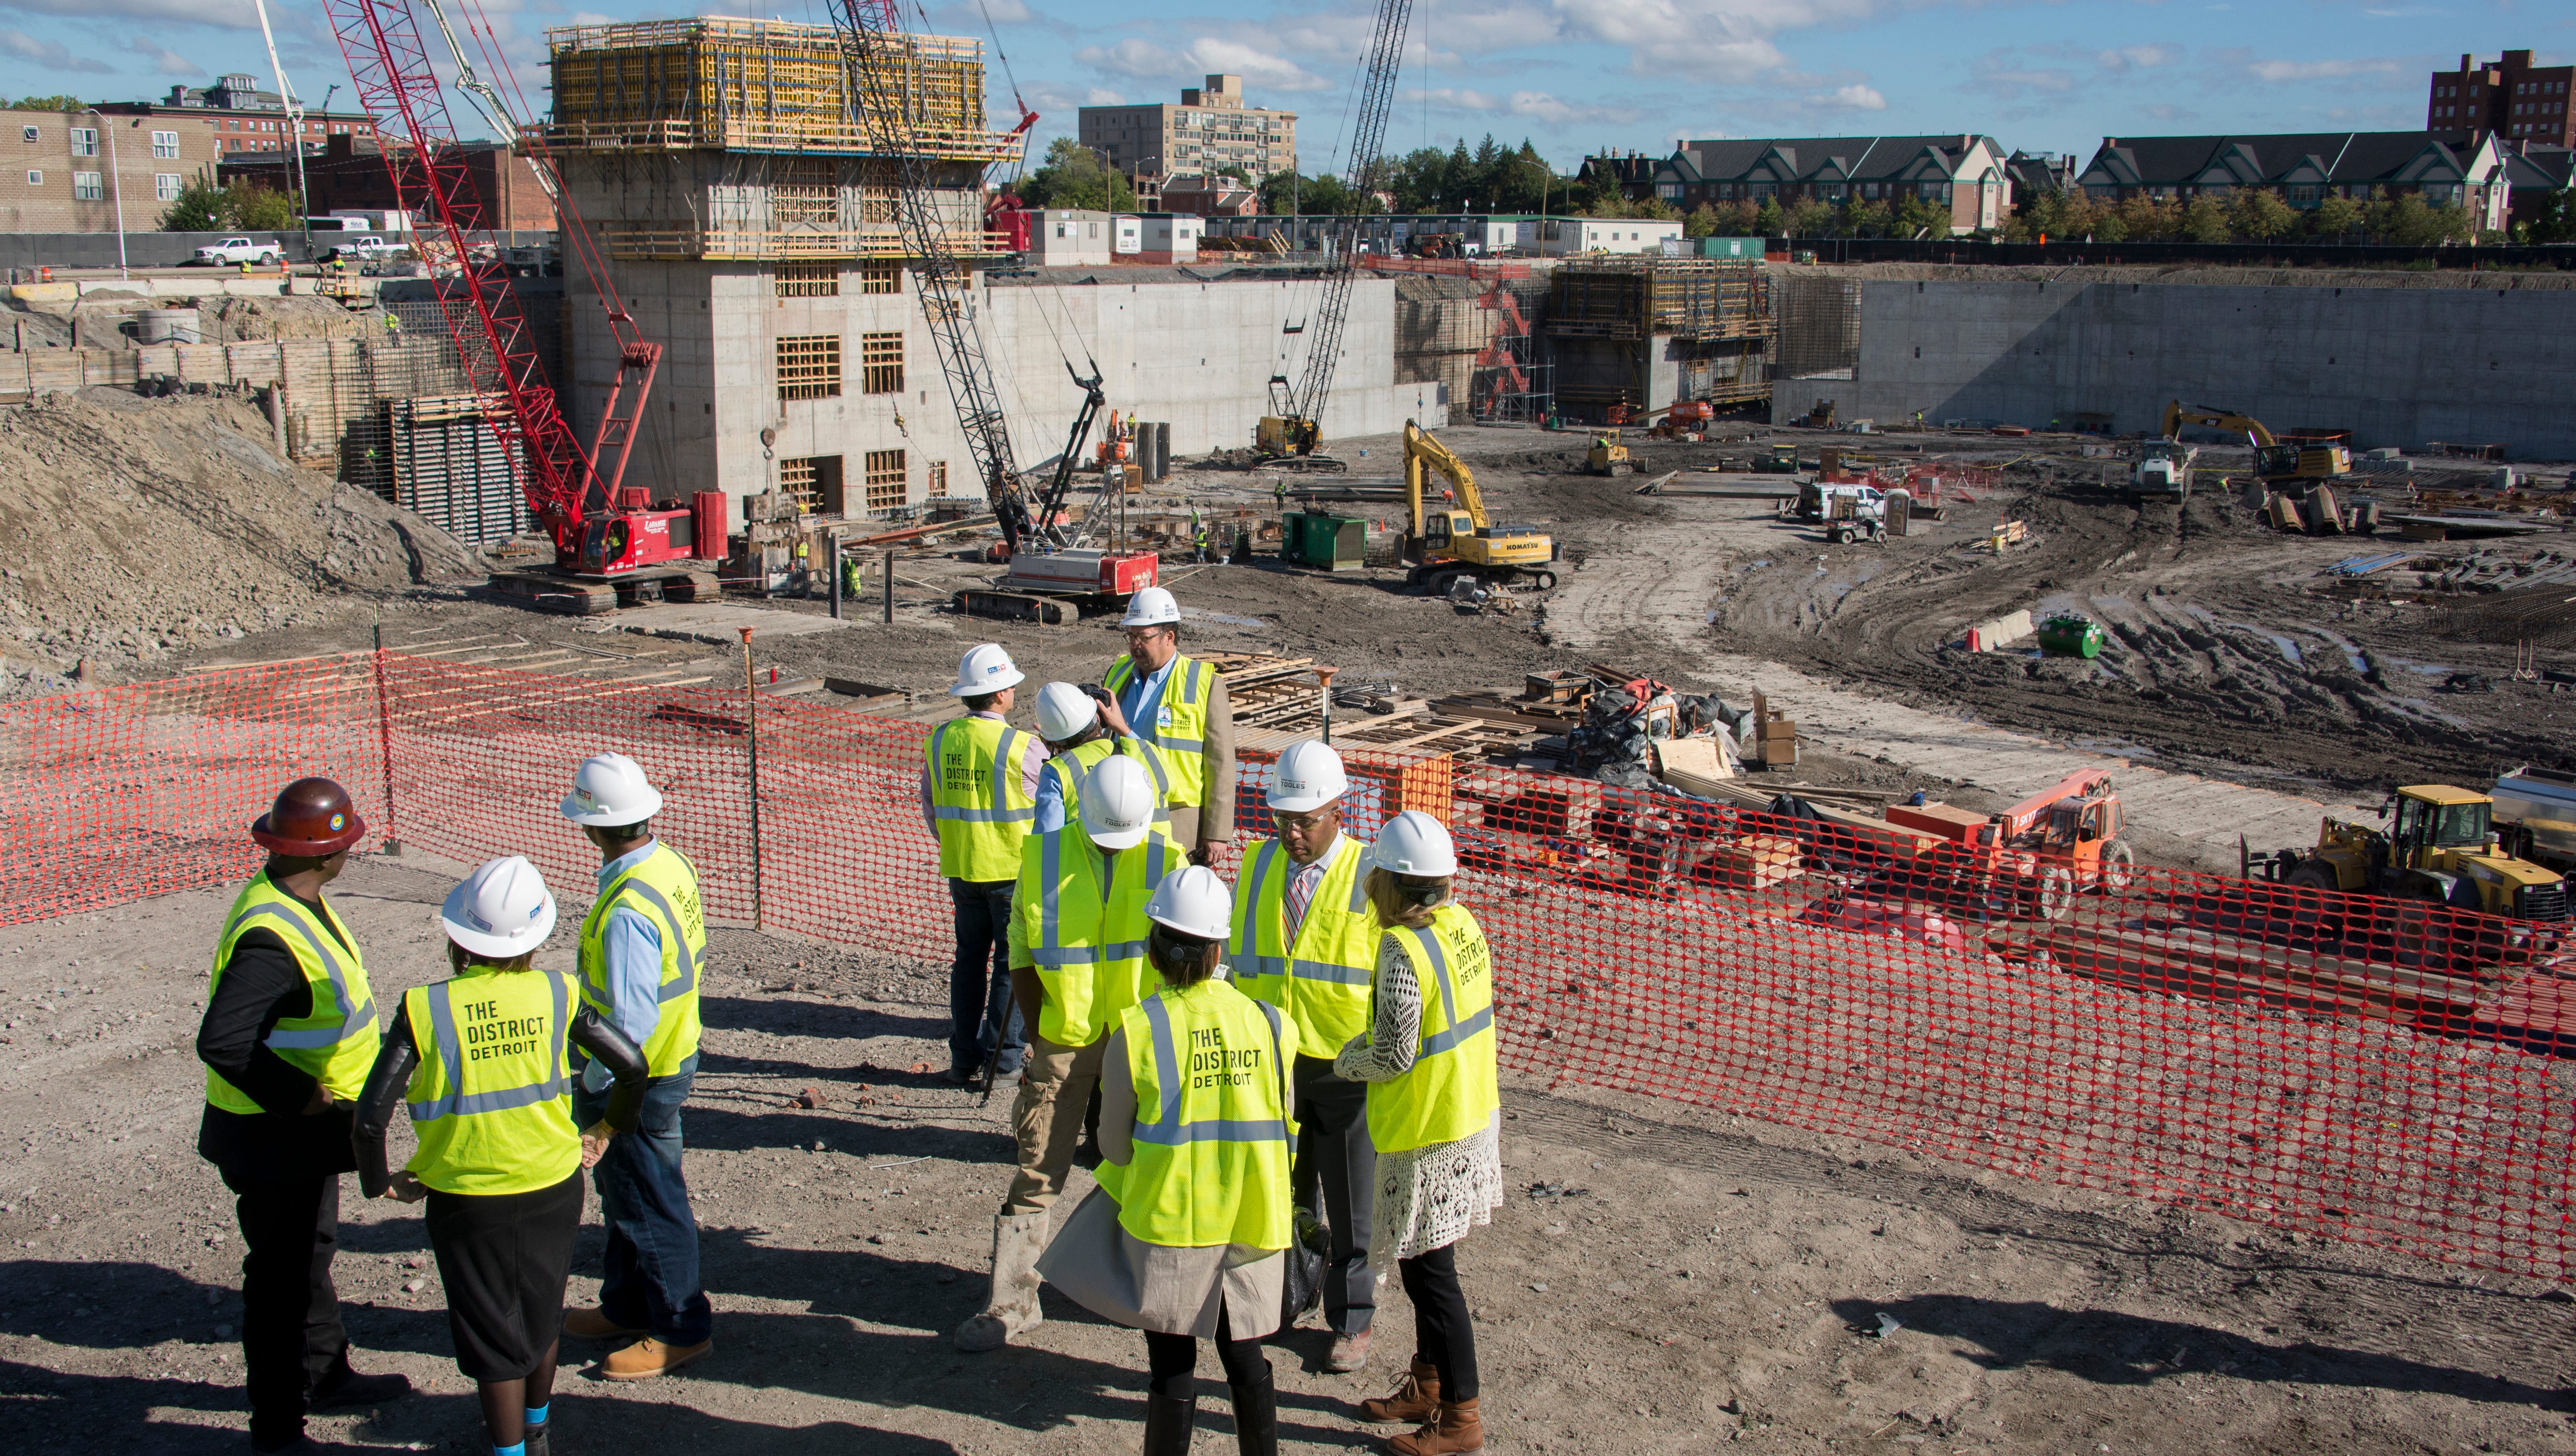 Project leaders and members of the media take in the view of the construction site      October 1, 2015.